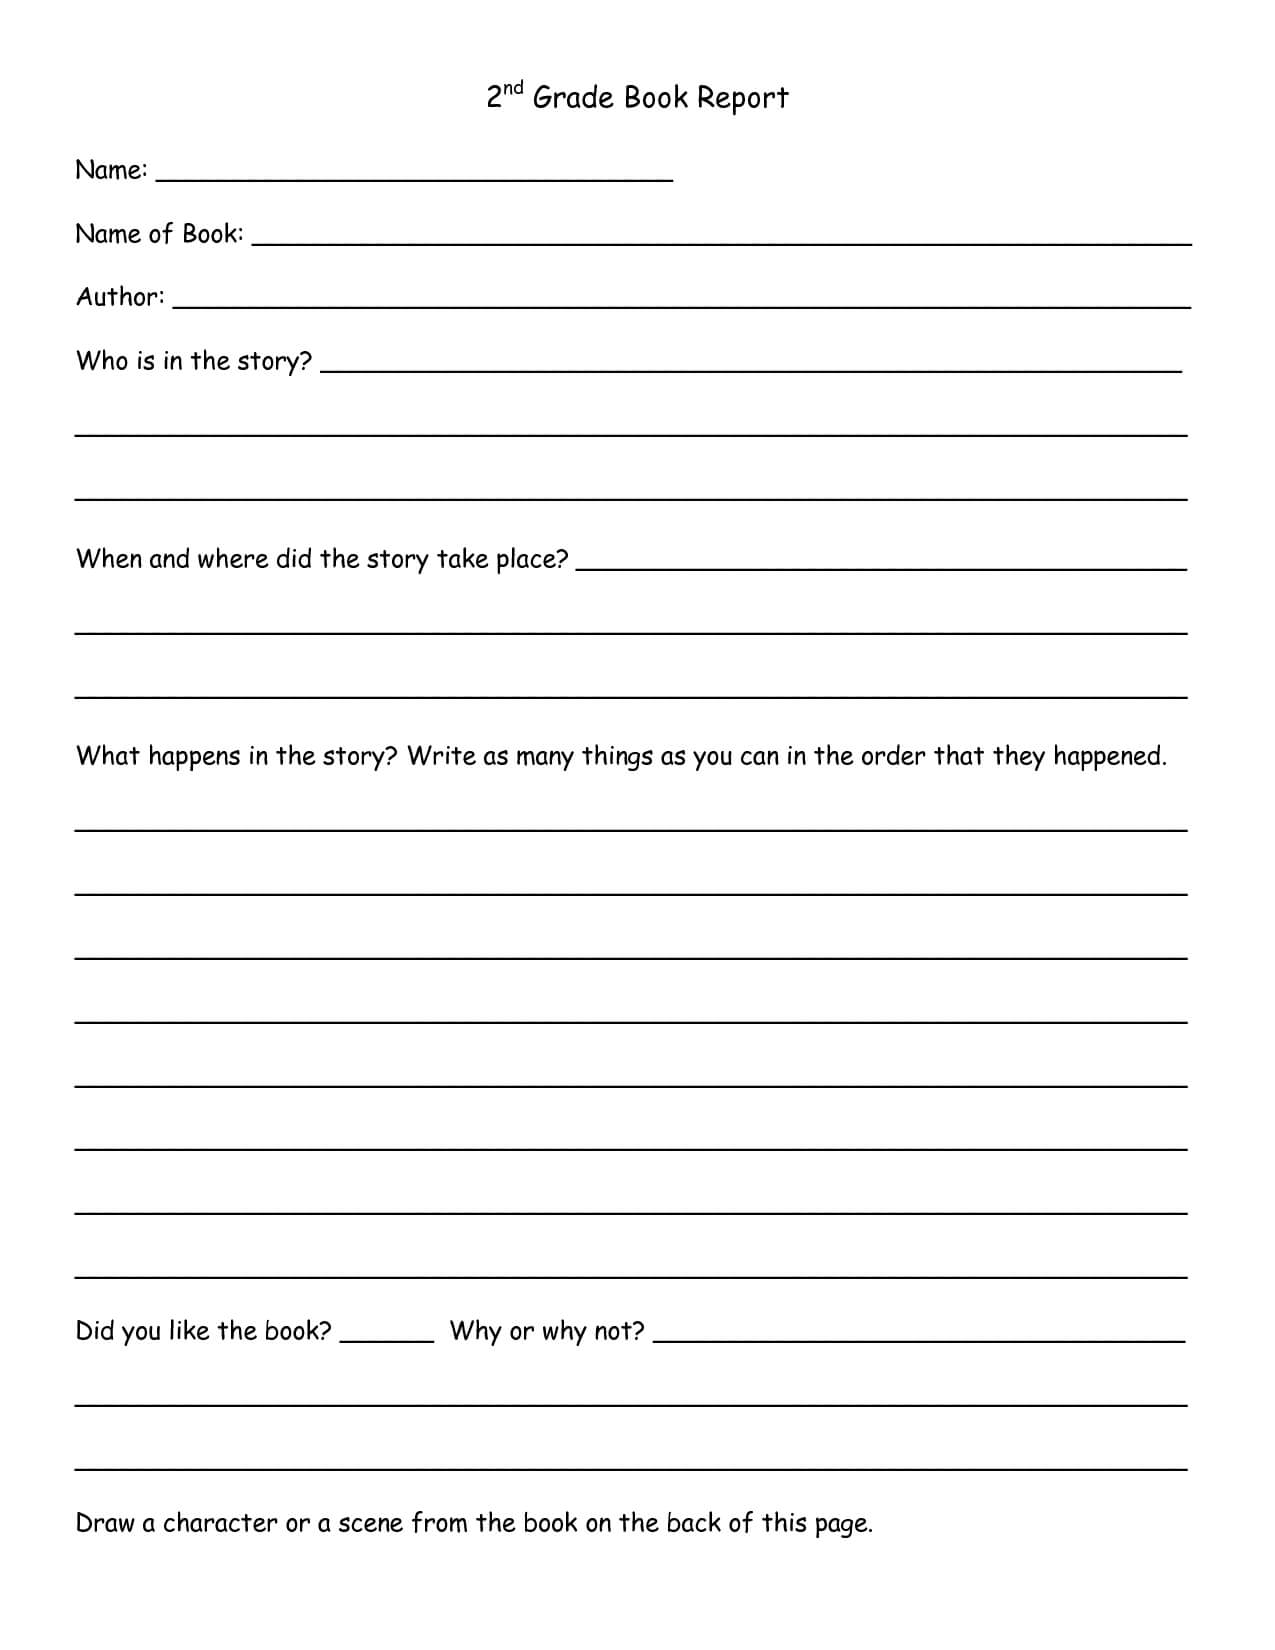 2Nd Grade Book Report Template – Google Search | 2Nd Grade For 2Nd Grade Book Report Template